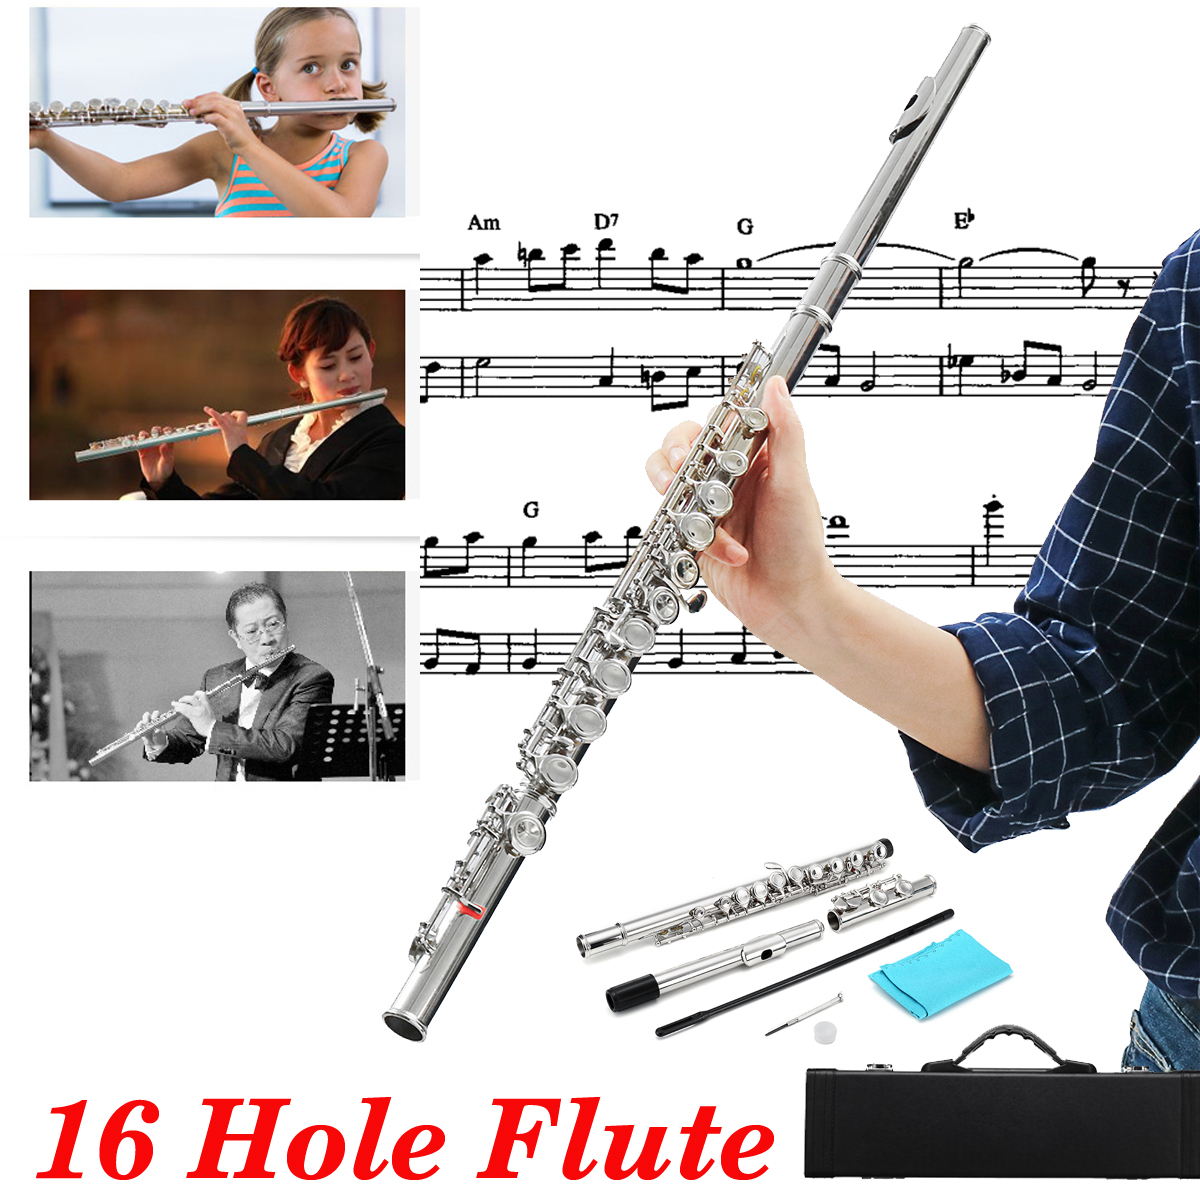 16 Holes C Key Colored Flute Nickel Plated Silver Tube Woodwind Instrument with Box 9